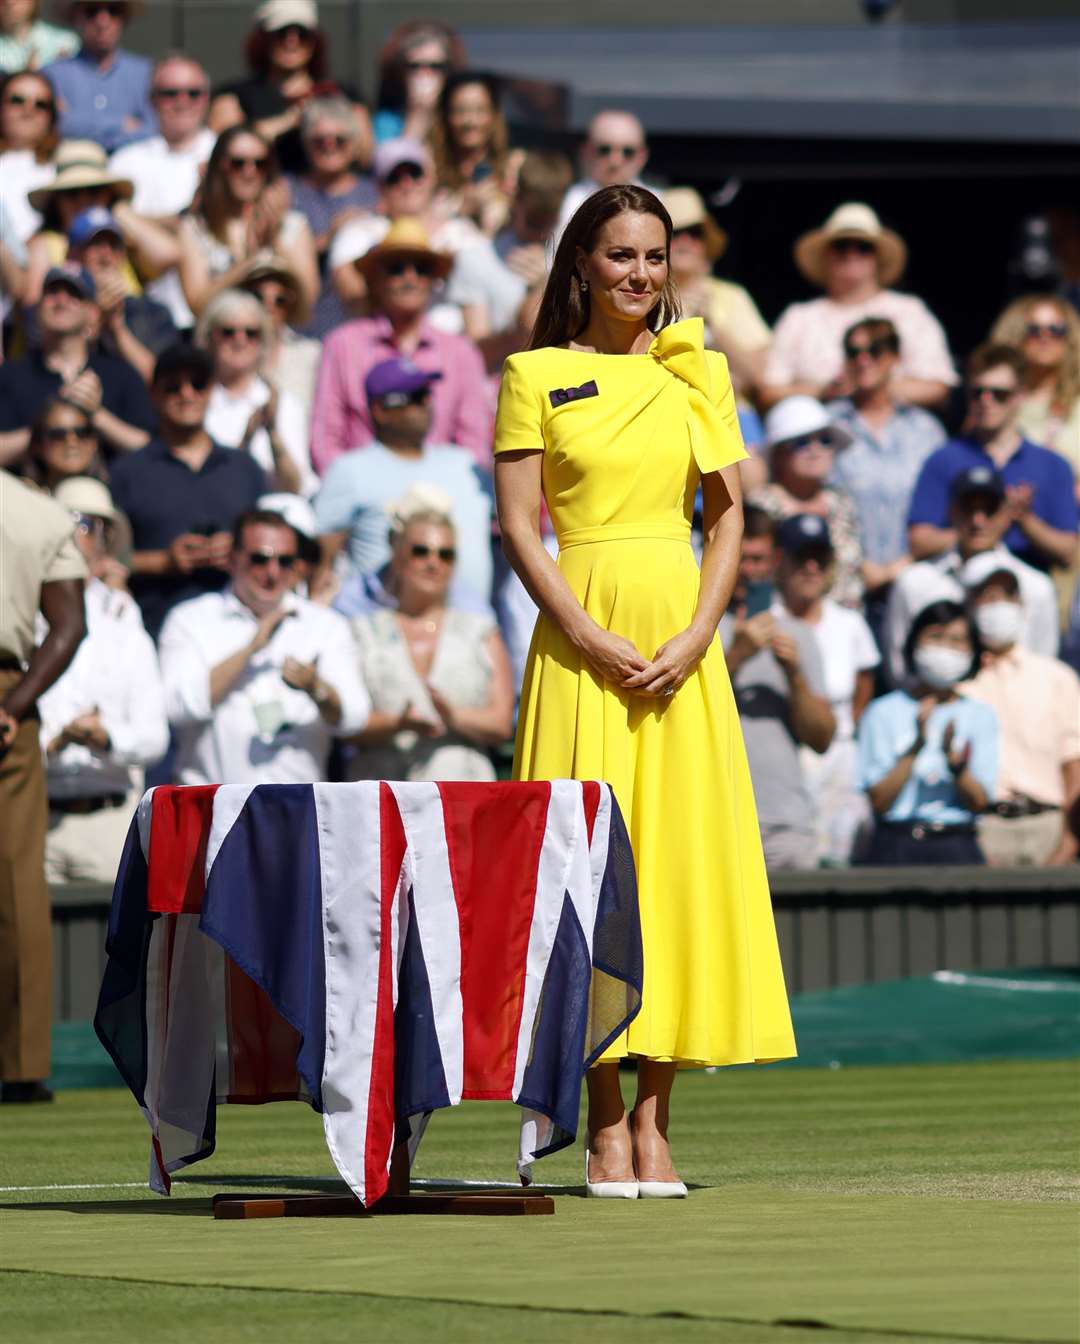 The Princess of Wales on Centre Court at the 2022 Wimbledon Championships (Steve Paston/PA)